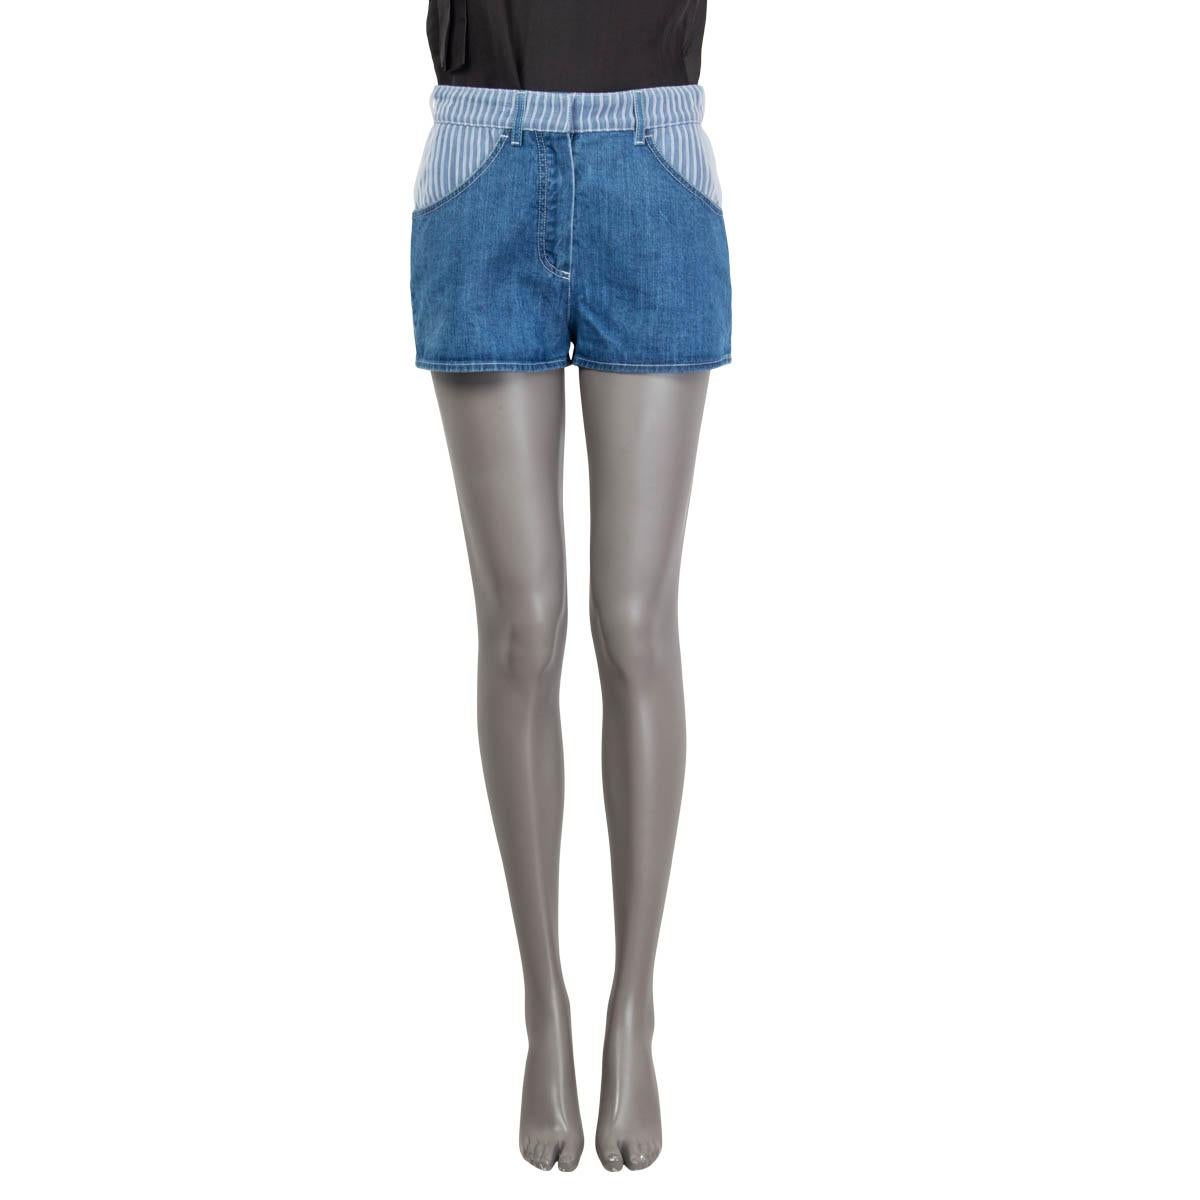 100% authentic Chanel hot pants shorts in blue denim cotton (100%) and sheer white polyester (100%) pleated details at front and back. Have been worn with a small tear by the belt loop and on the back pocket. Overall in very good condition.